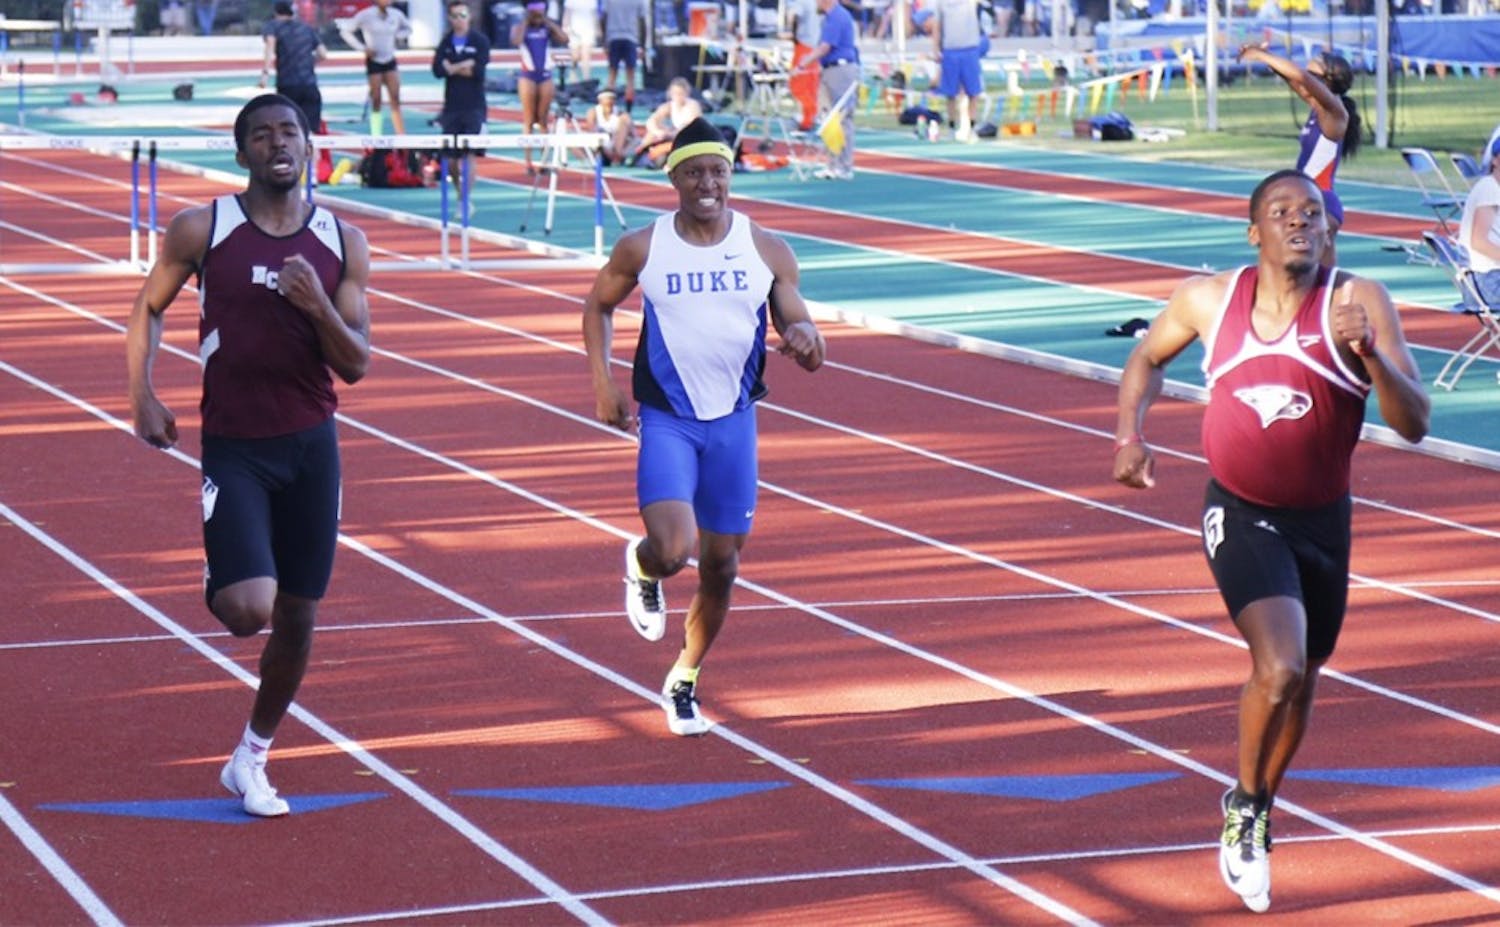 Junior&nbsp;Chaz Hawkins will run the 200 meters for the first time this outdoor season&nbsp;this weekend at the Duke Invitational&nbsp;in addition to competing the discus and pole vault.